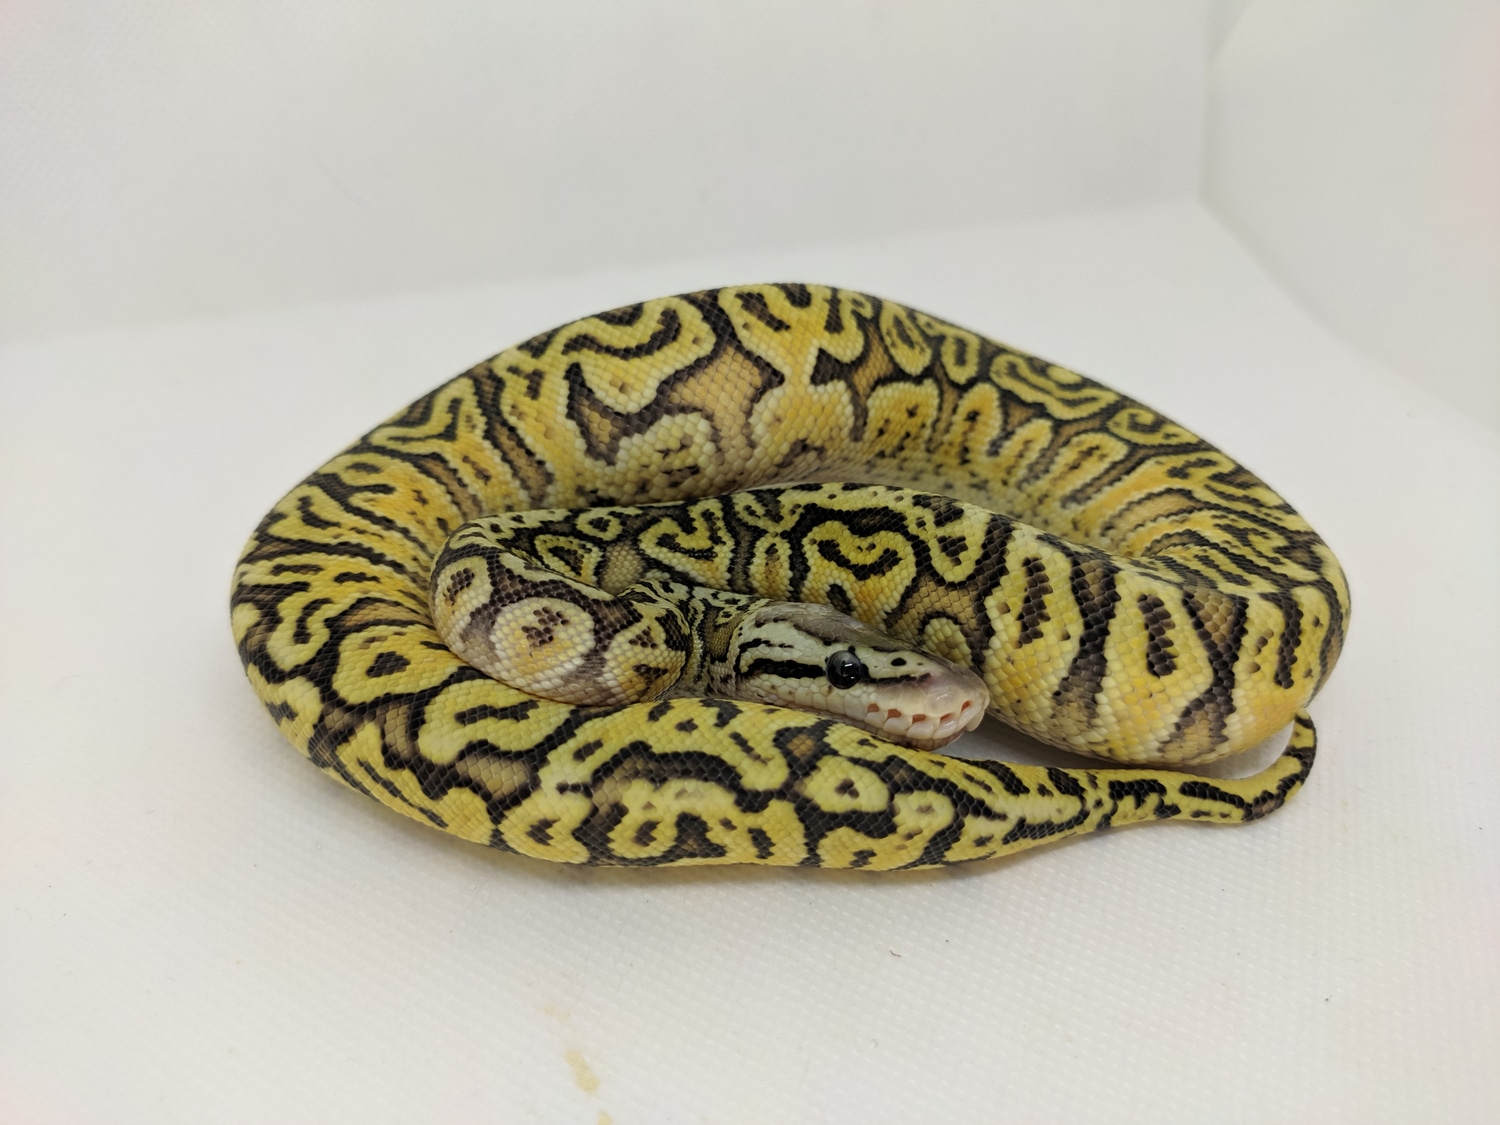 Super Pastel Fractal Special Hidden Gene Woma Yellow Belly Ball Python by Prodigious Pythons